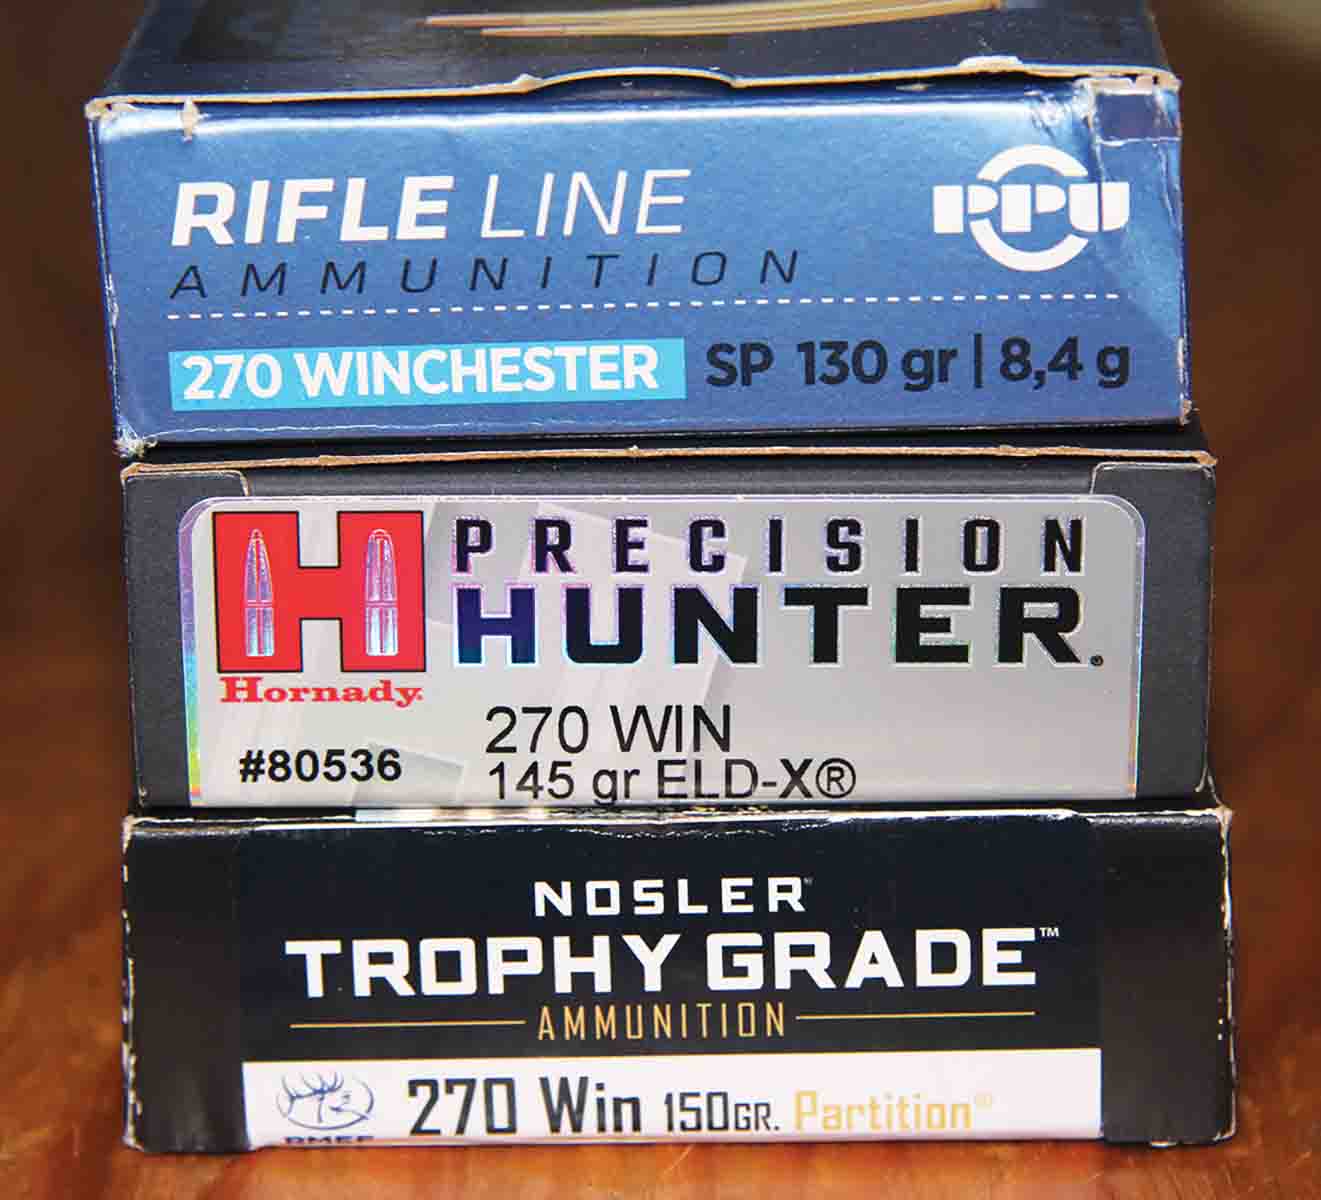 Factory ammunition tested in the Mauser M18 Savanna included, top to bottom, PPU’s Rifle Line 130-grain softpoint, Hornady’s Precision Hunter 145-grain ELD-X and Nosler’s Trophy Grade 150-grain Partition.